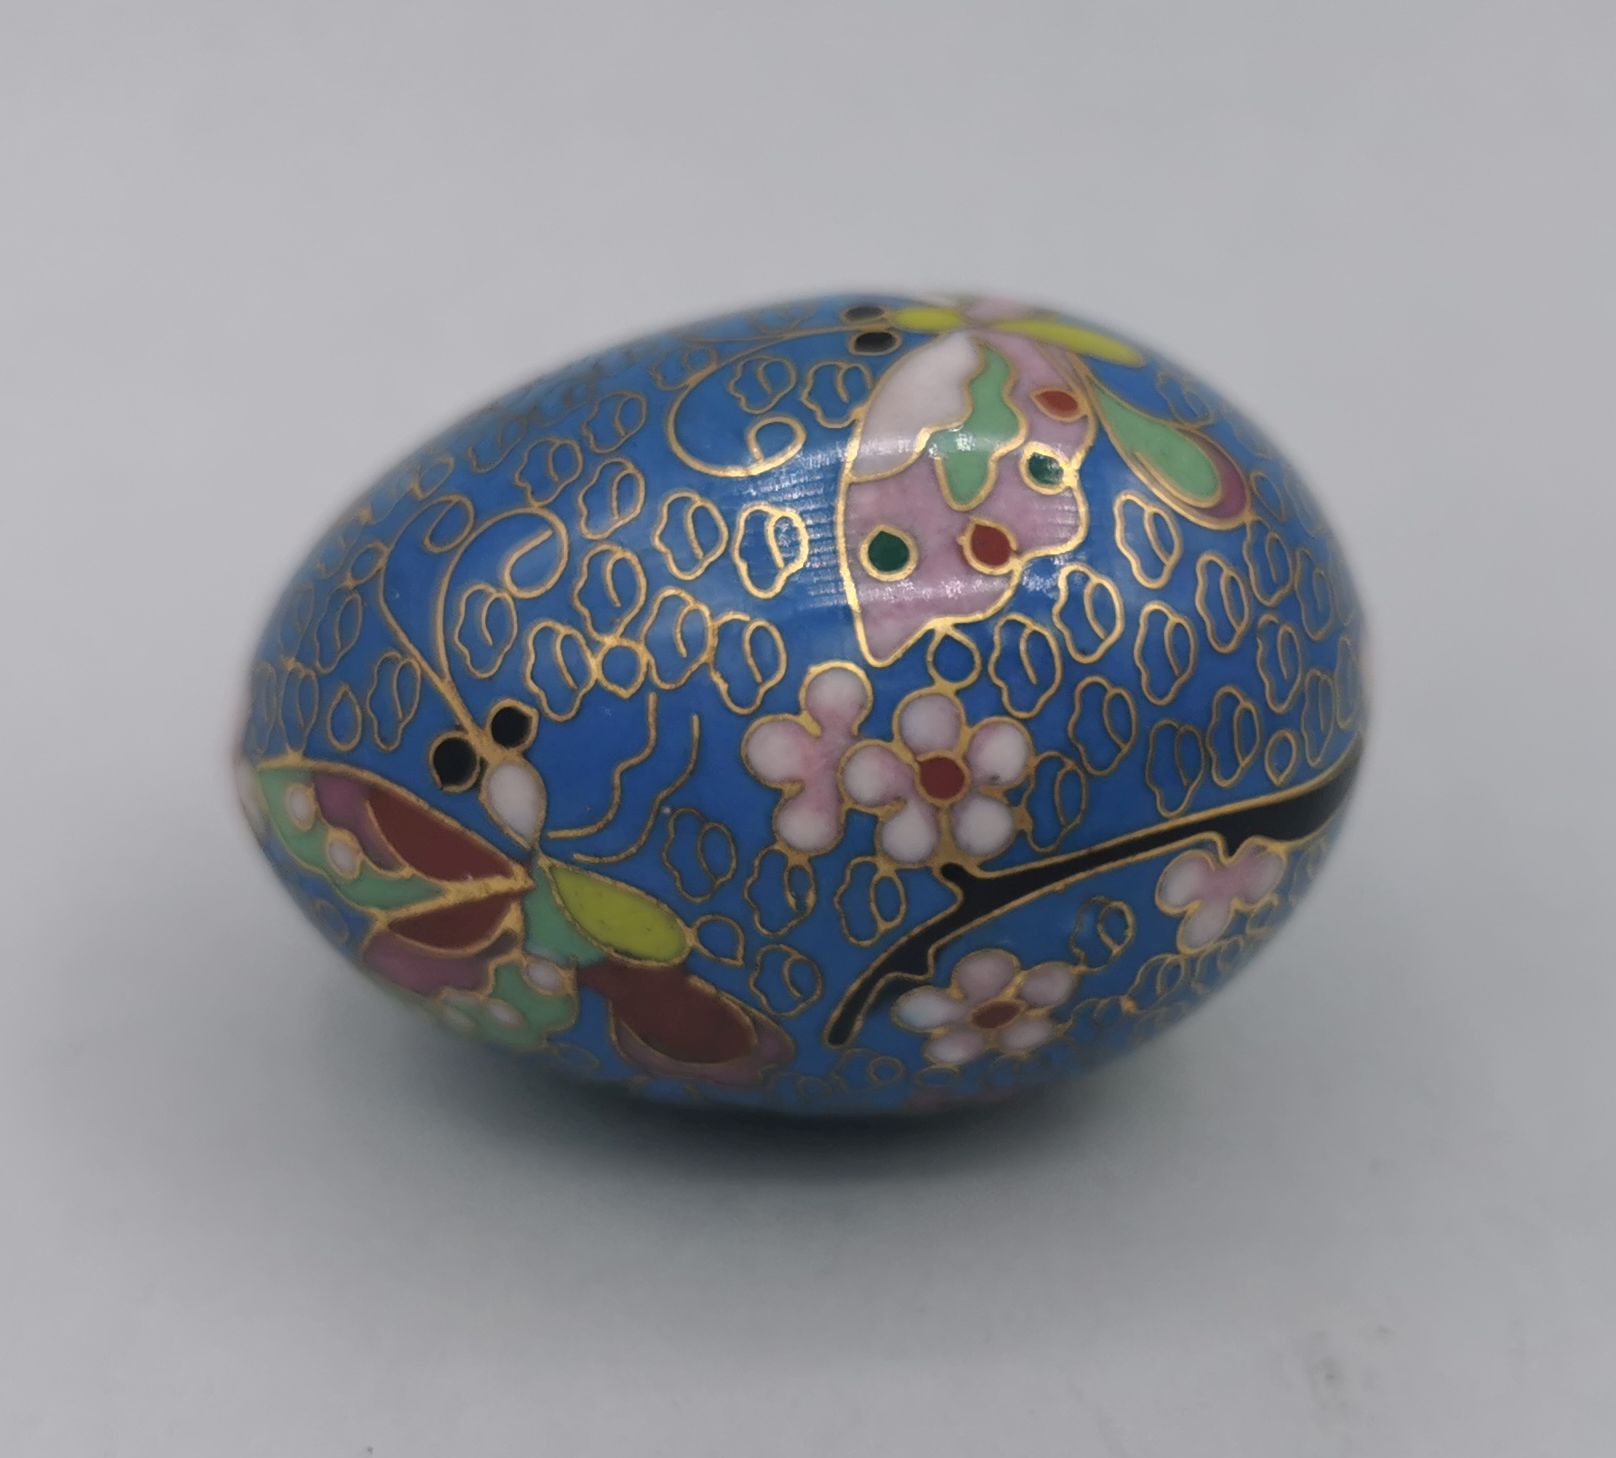 10 MINIATURE CLOISONNE OBJECTS - Image 7 of 15